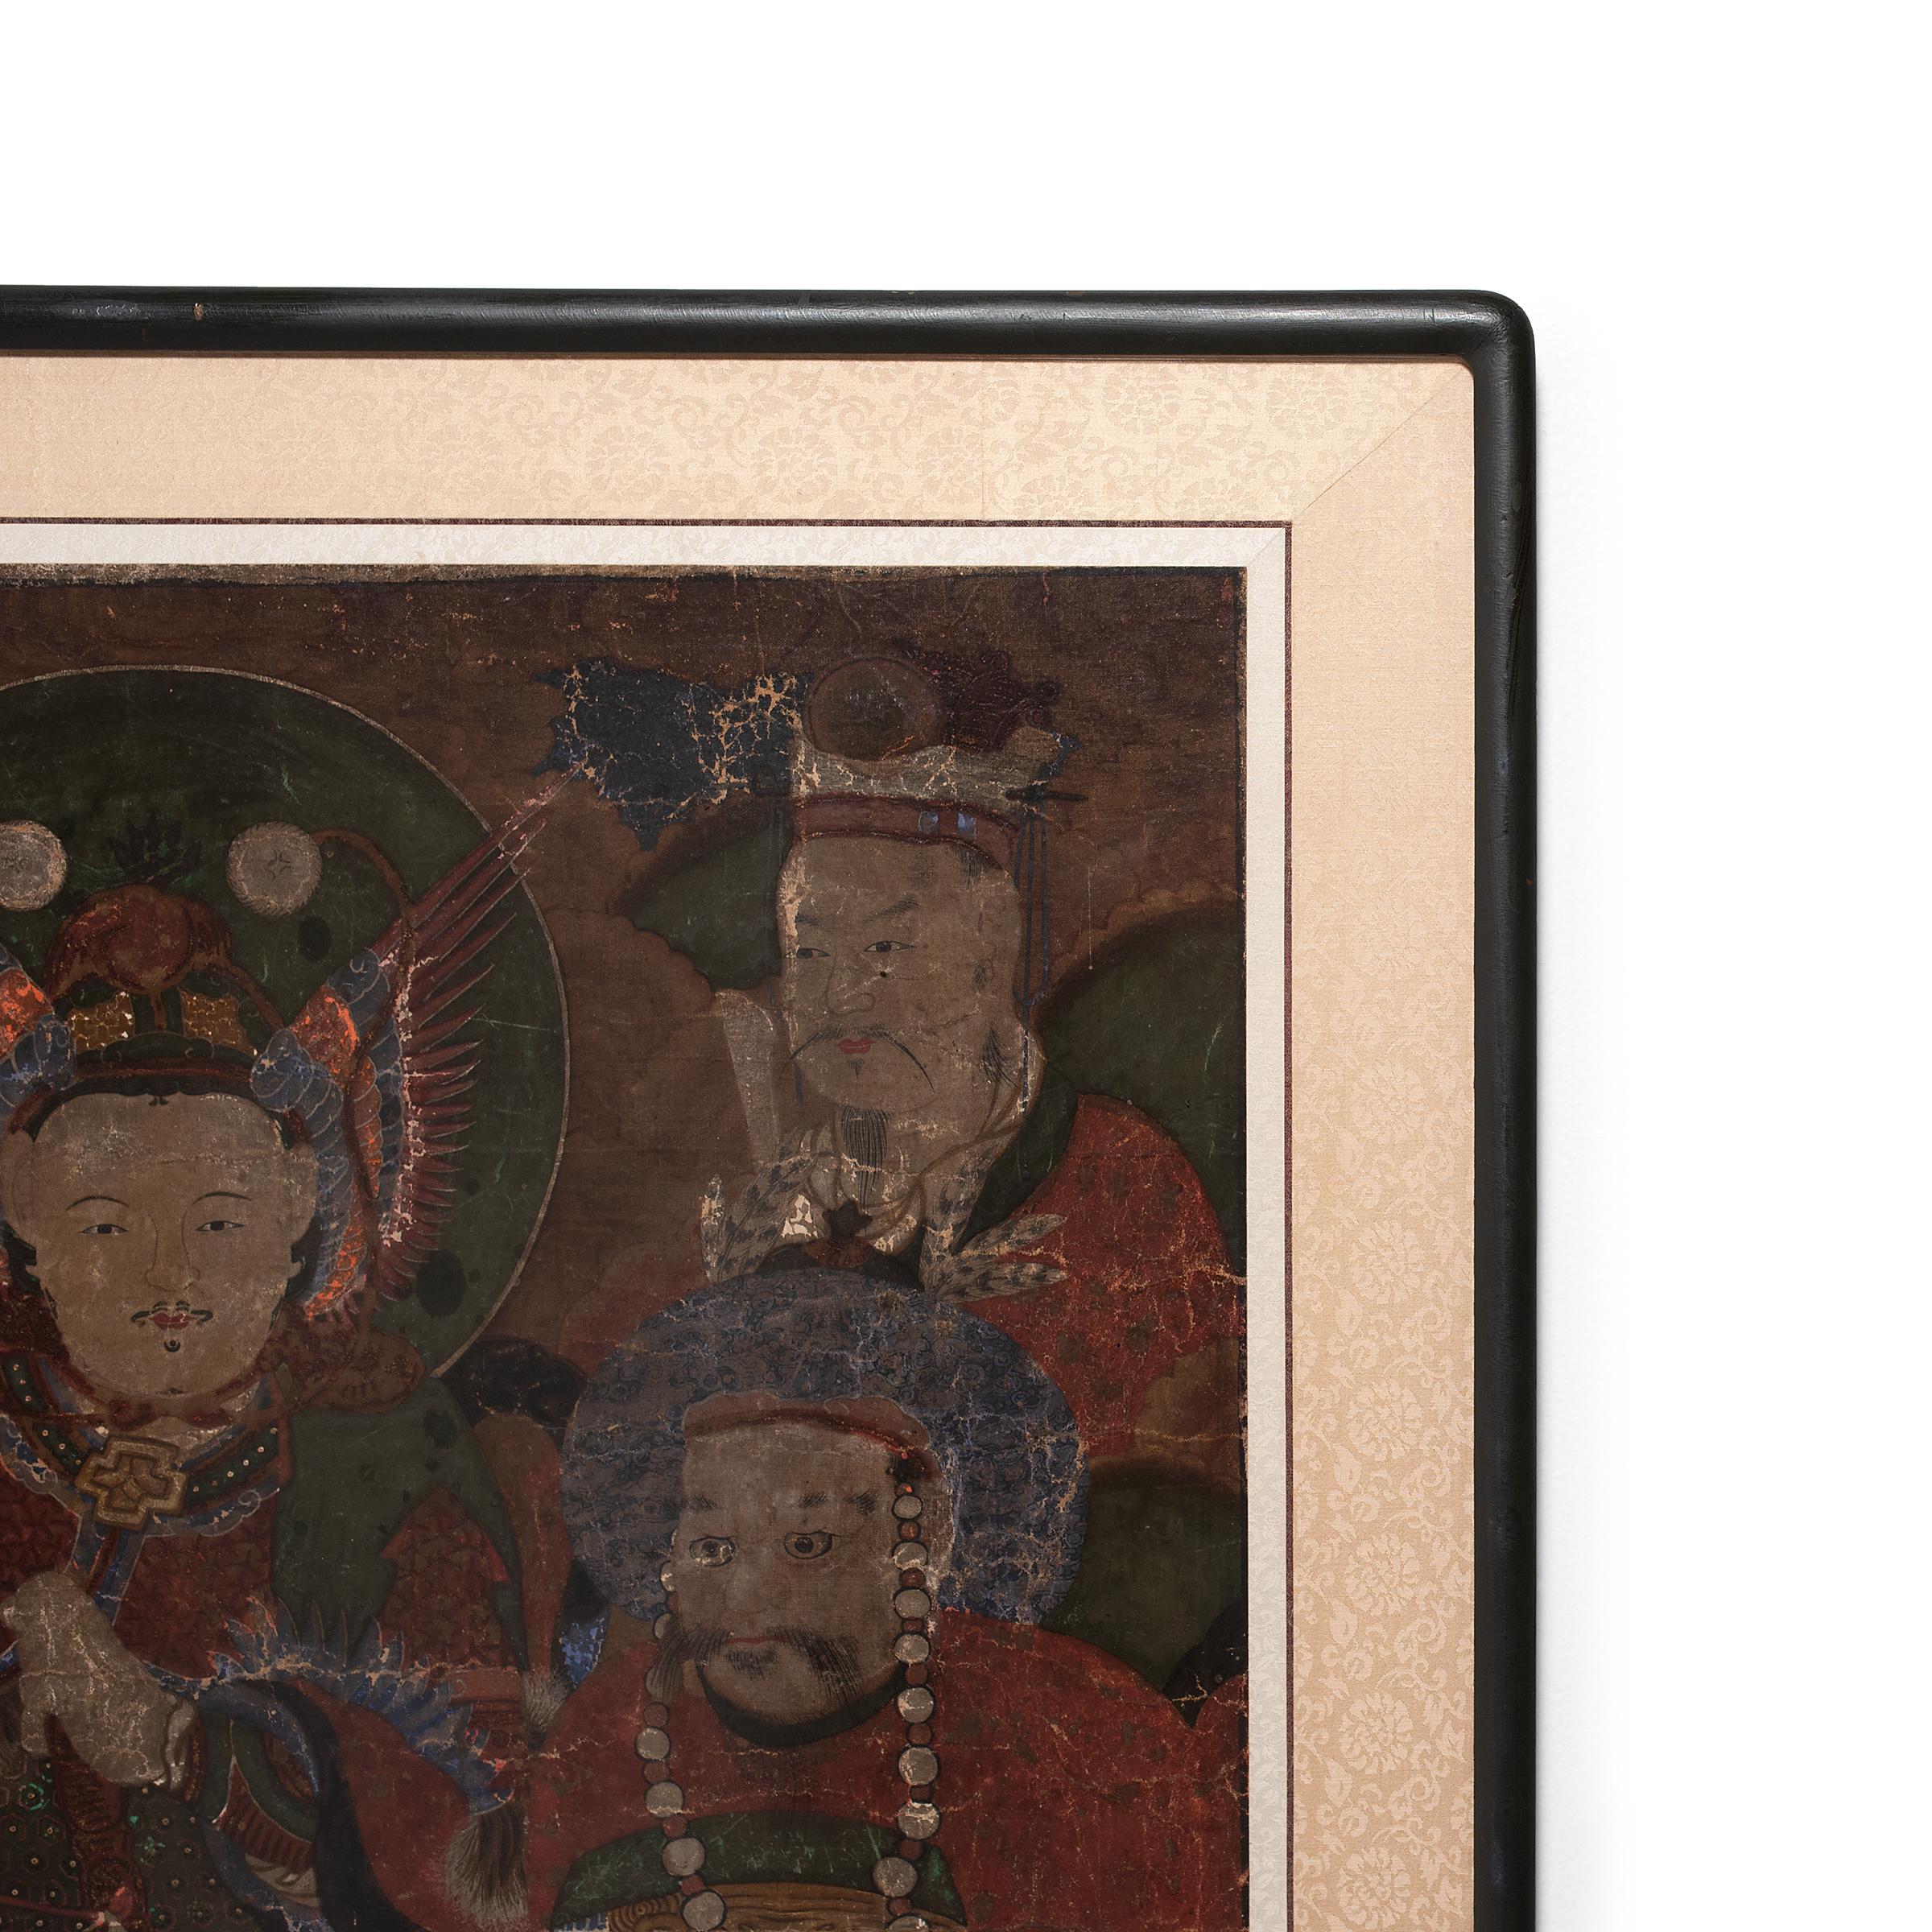 Evolving from the Korean tradition of tomb mural painting came the Buddhist practice of “taenghwa,” or hanging-painting, a form of religious painting that included hanging scrolls, framed paintings and wall murals. Influenced by Chinese and Central